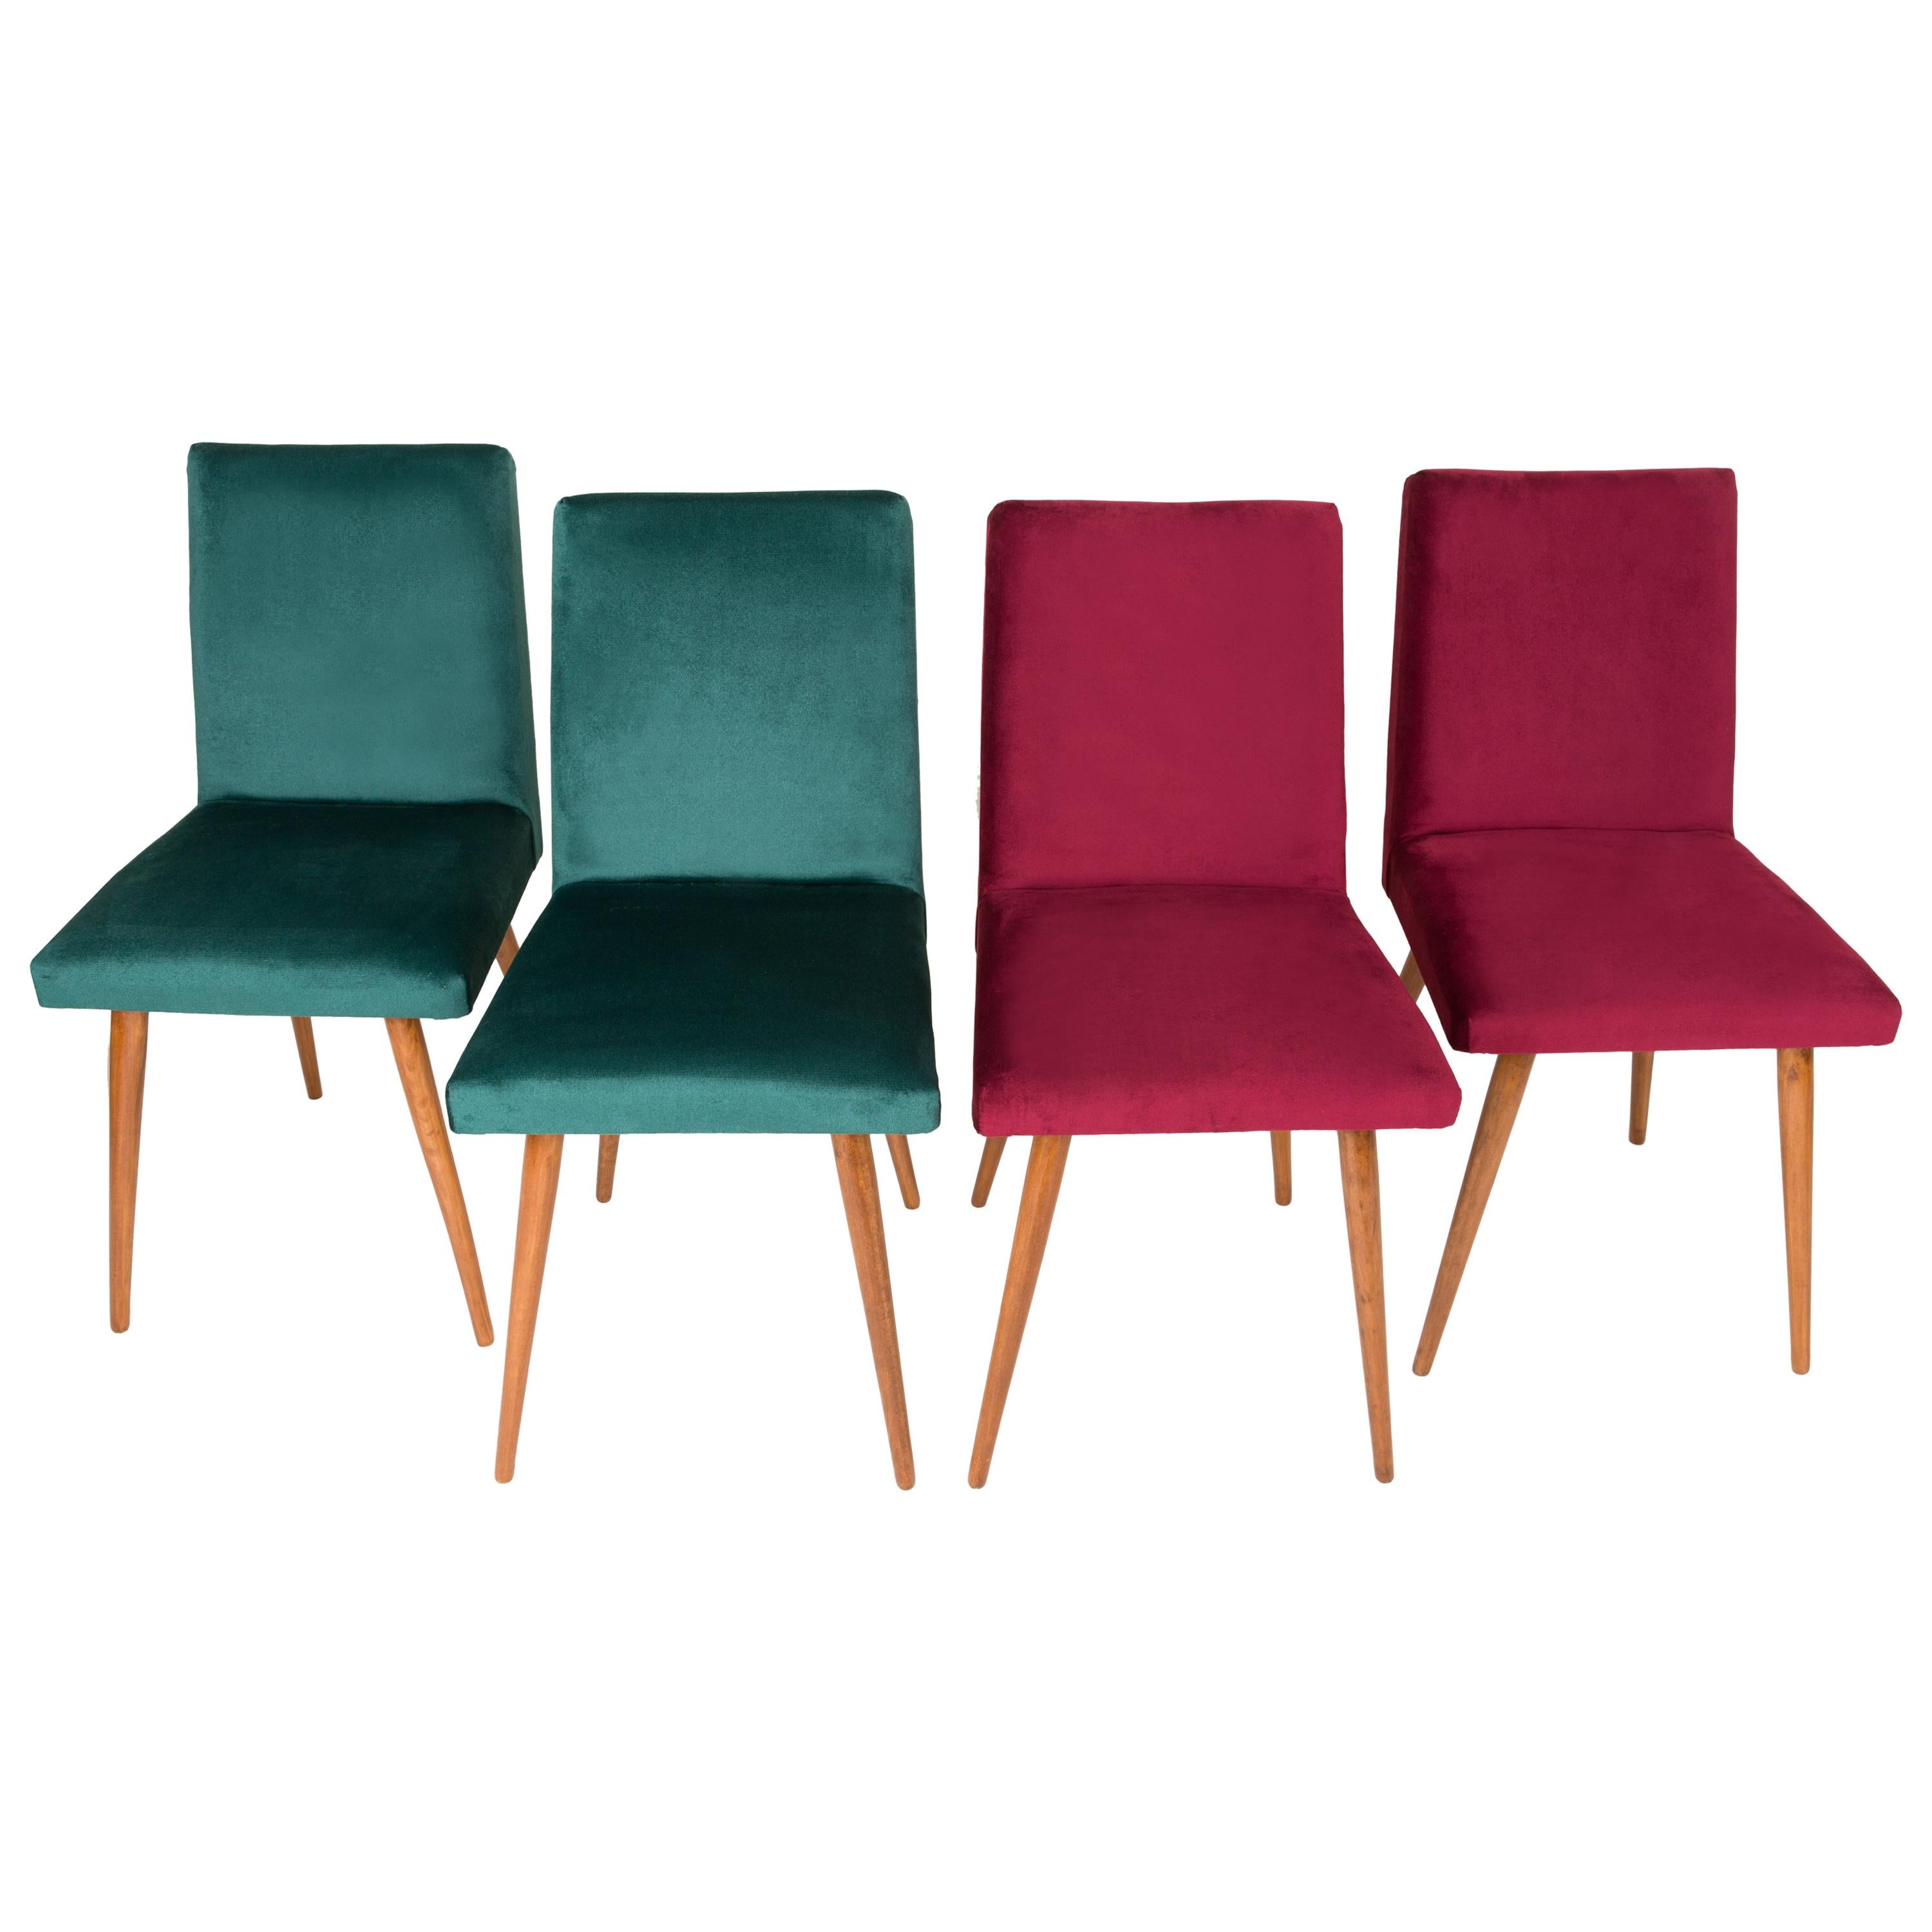 Set of Four 20th Century Dark Green and Burgundy Velvet Chairs, 1960s For Sale